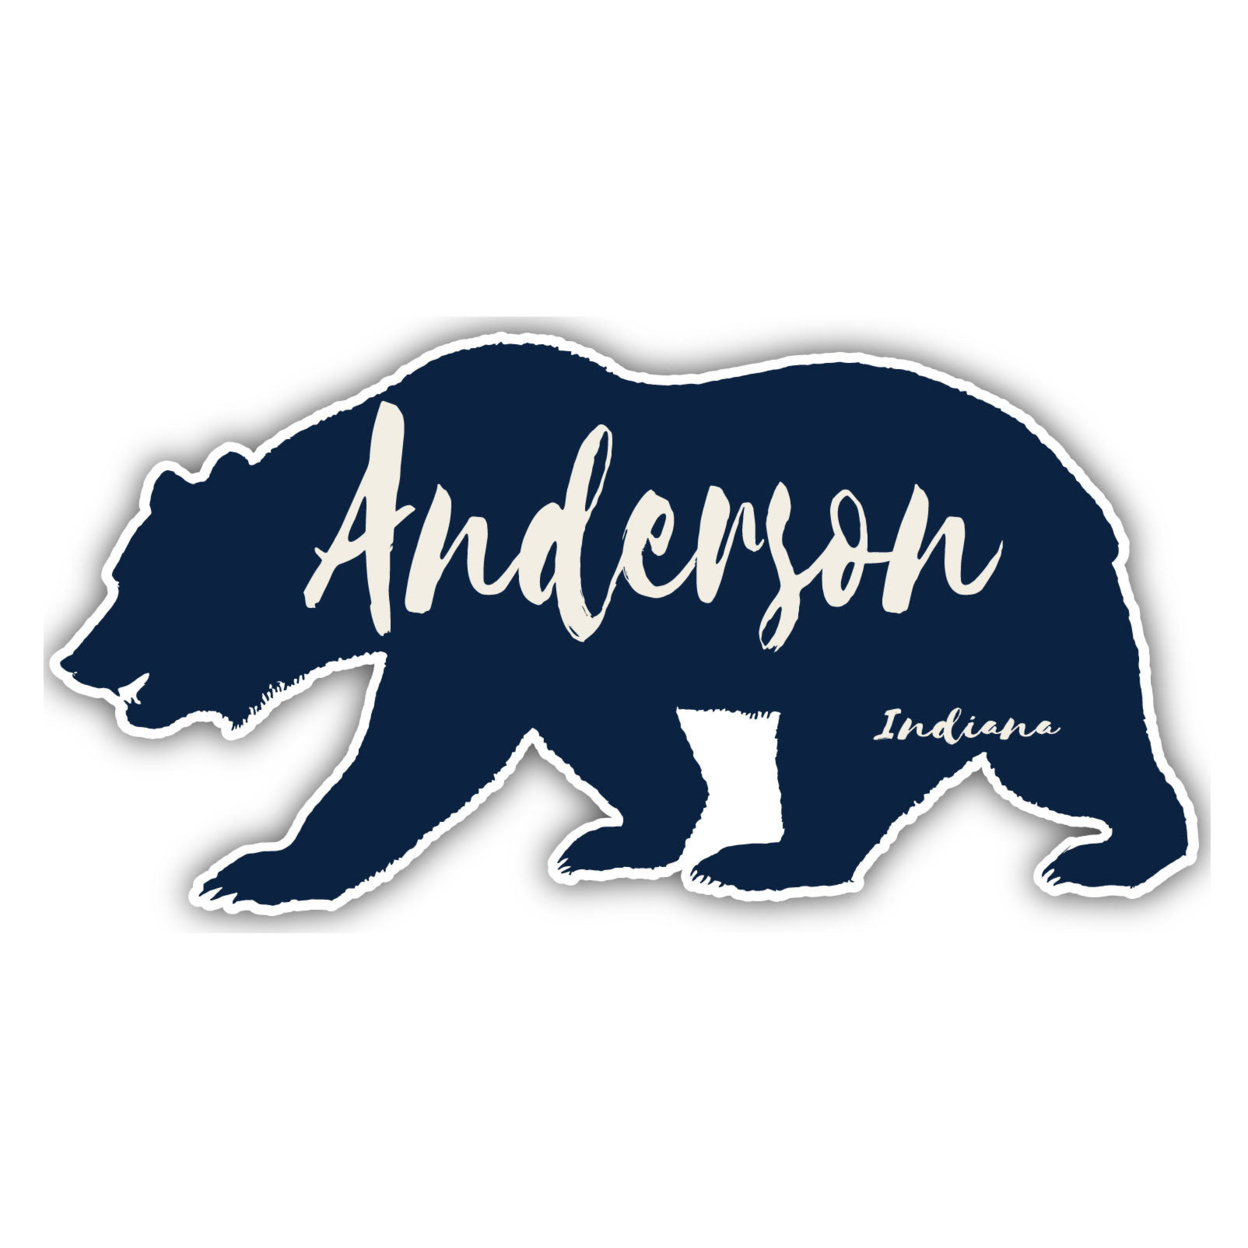 Anderson Indiana Souvenir Decorative Stickers (Choose Theme And Size) - Single Unit, 8-Inch, Bear